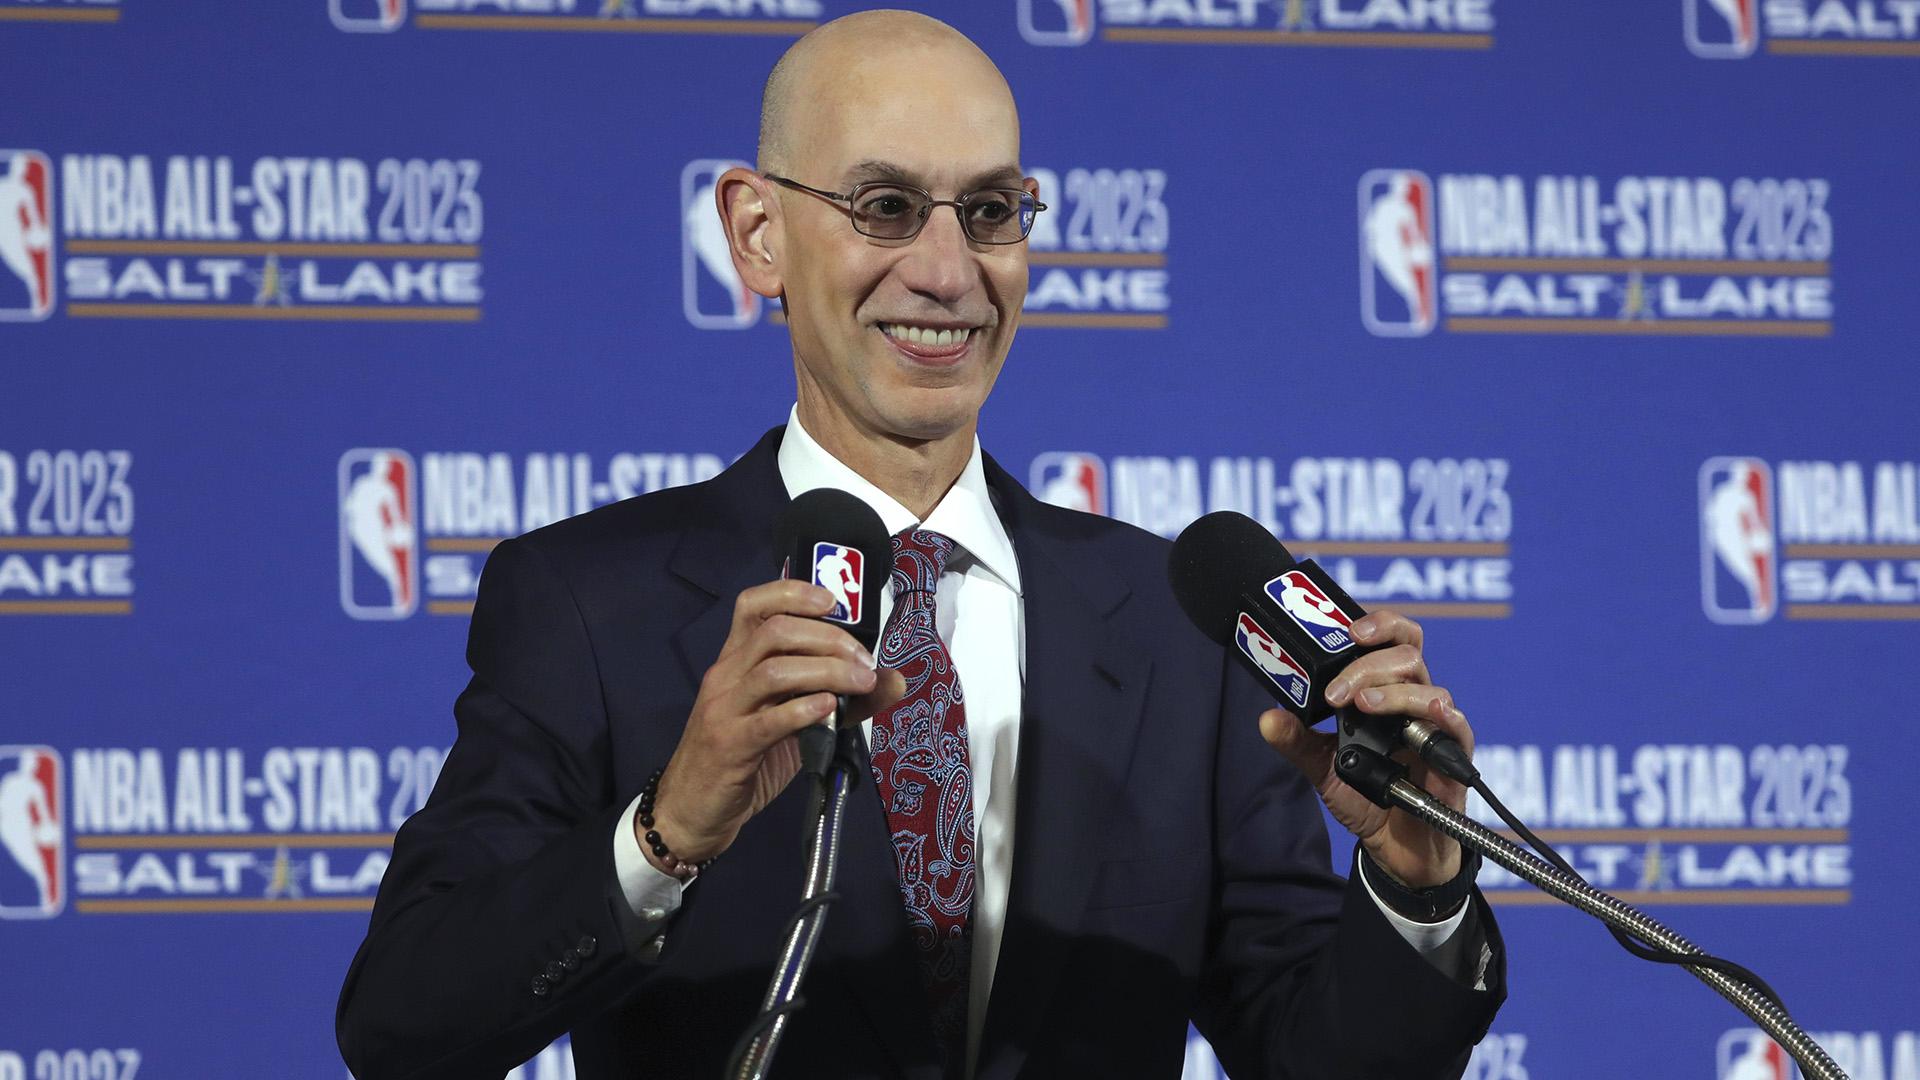 In this Oct. 23, 2019, file photo, NBA Commissioner Adam Silver speaks during a news conference at Vivint Smart Home Arena in Salt Lake City.  (AP Photo / Rick Bowmer, File)